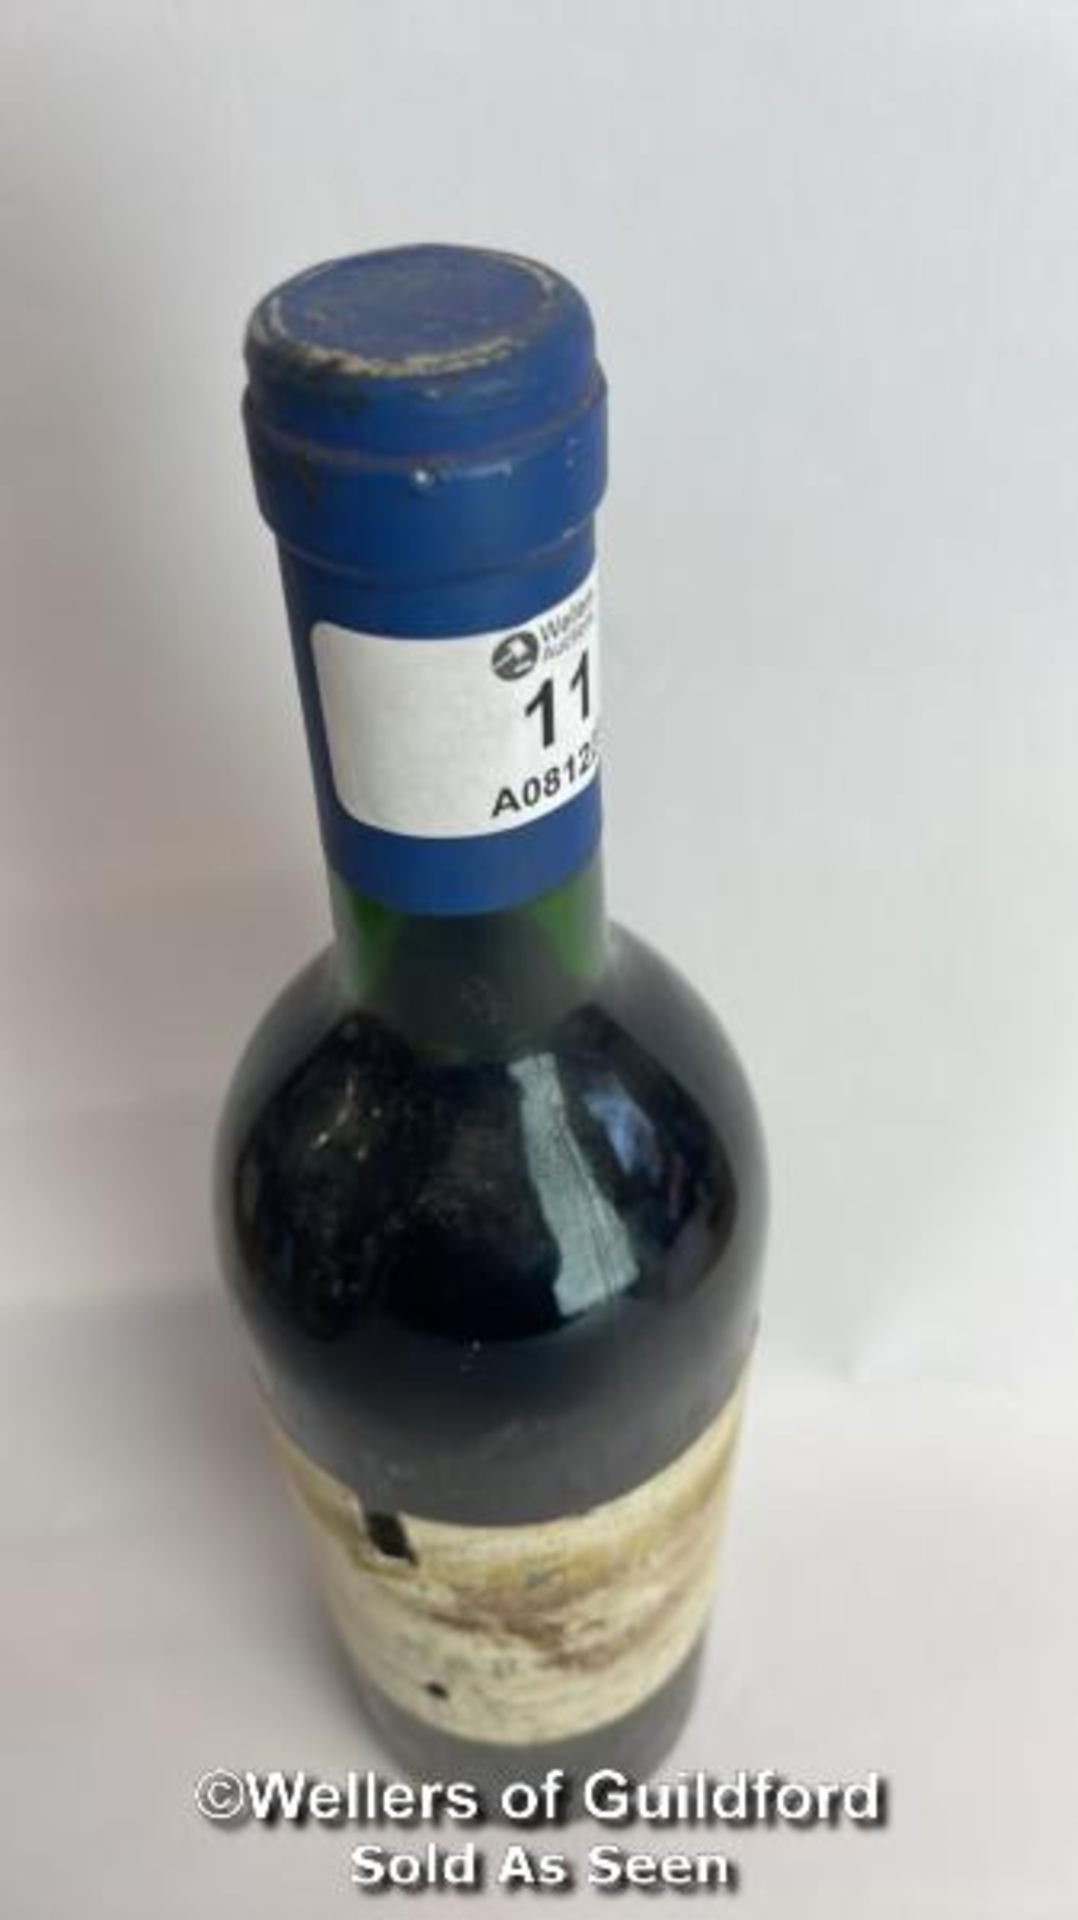 1990 Margaux Par E Parrot Bordeaux (Gironde), 75cl, 12% vol / Please see images for fill level and - Image 10 of 12